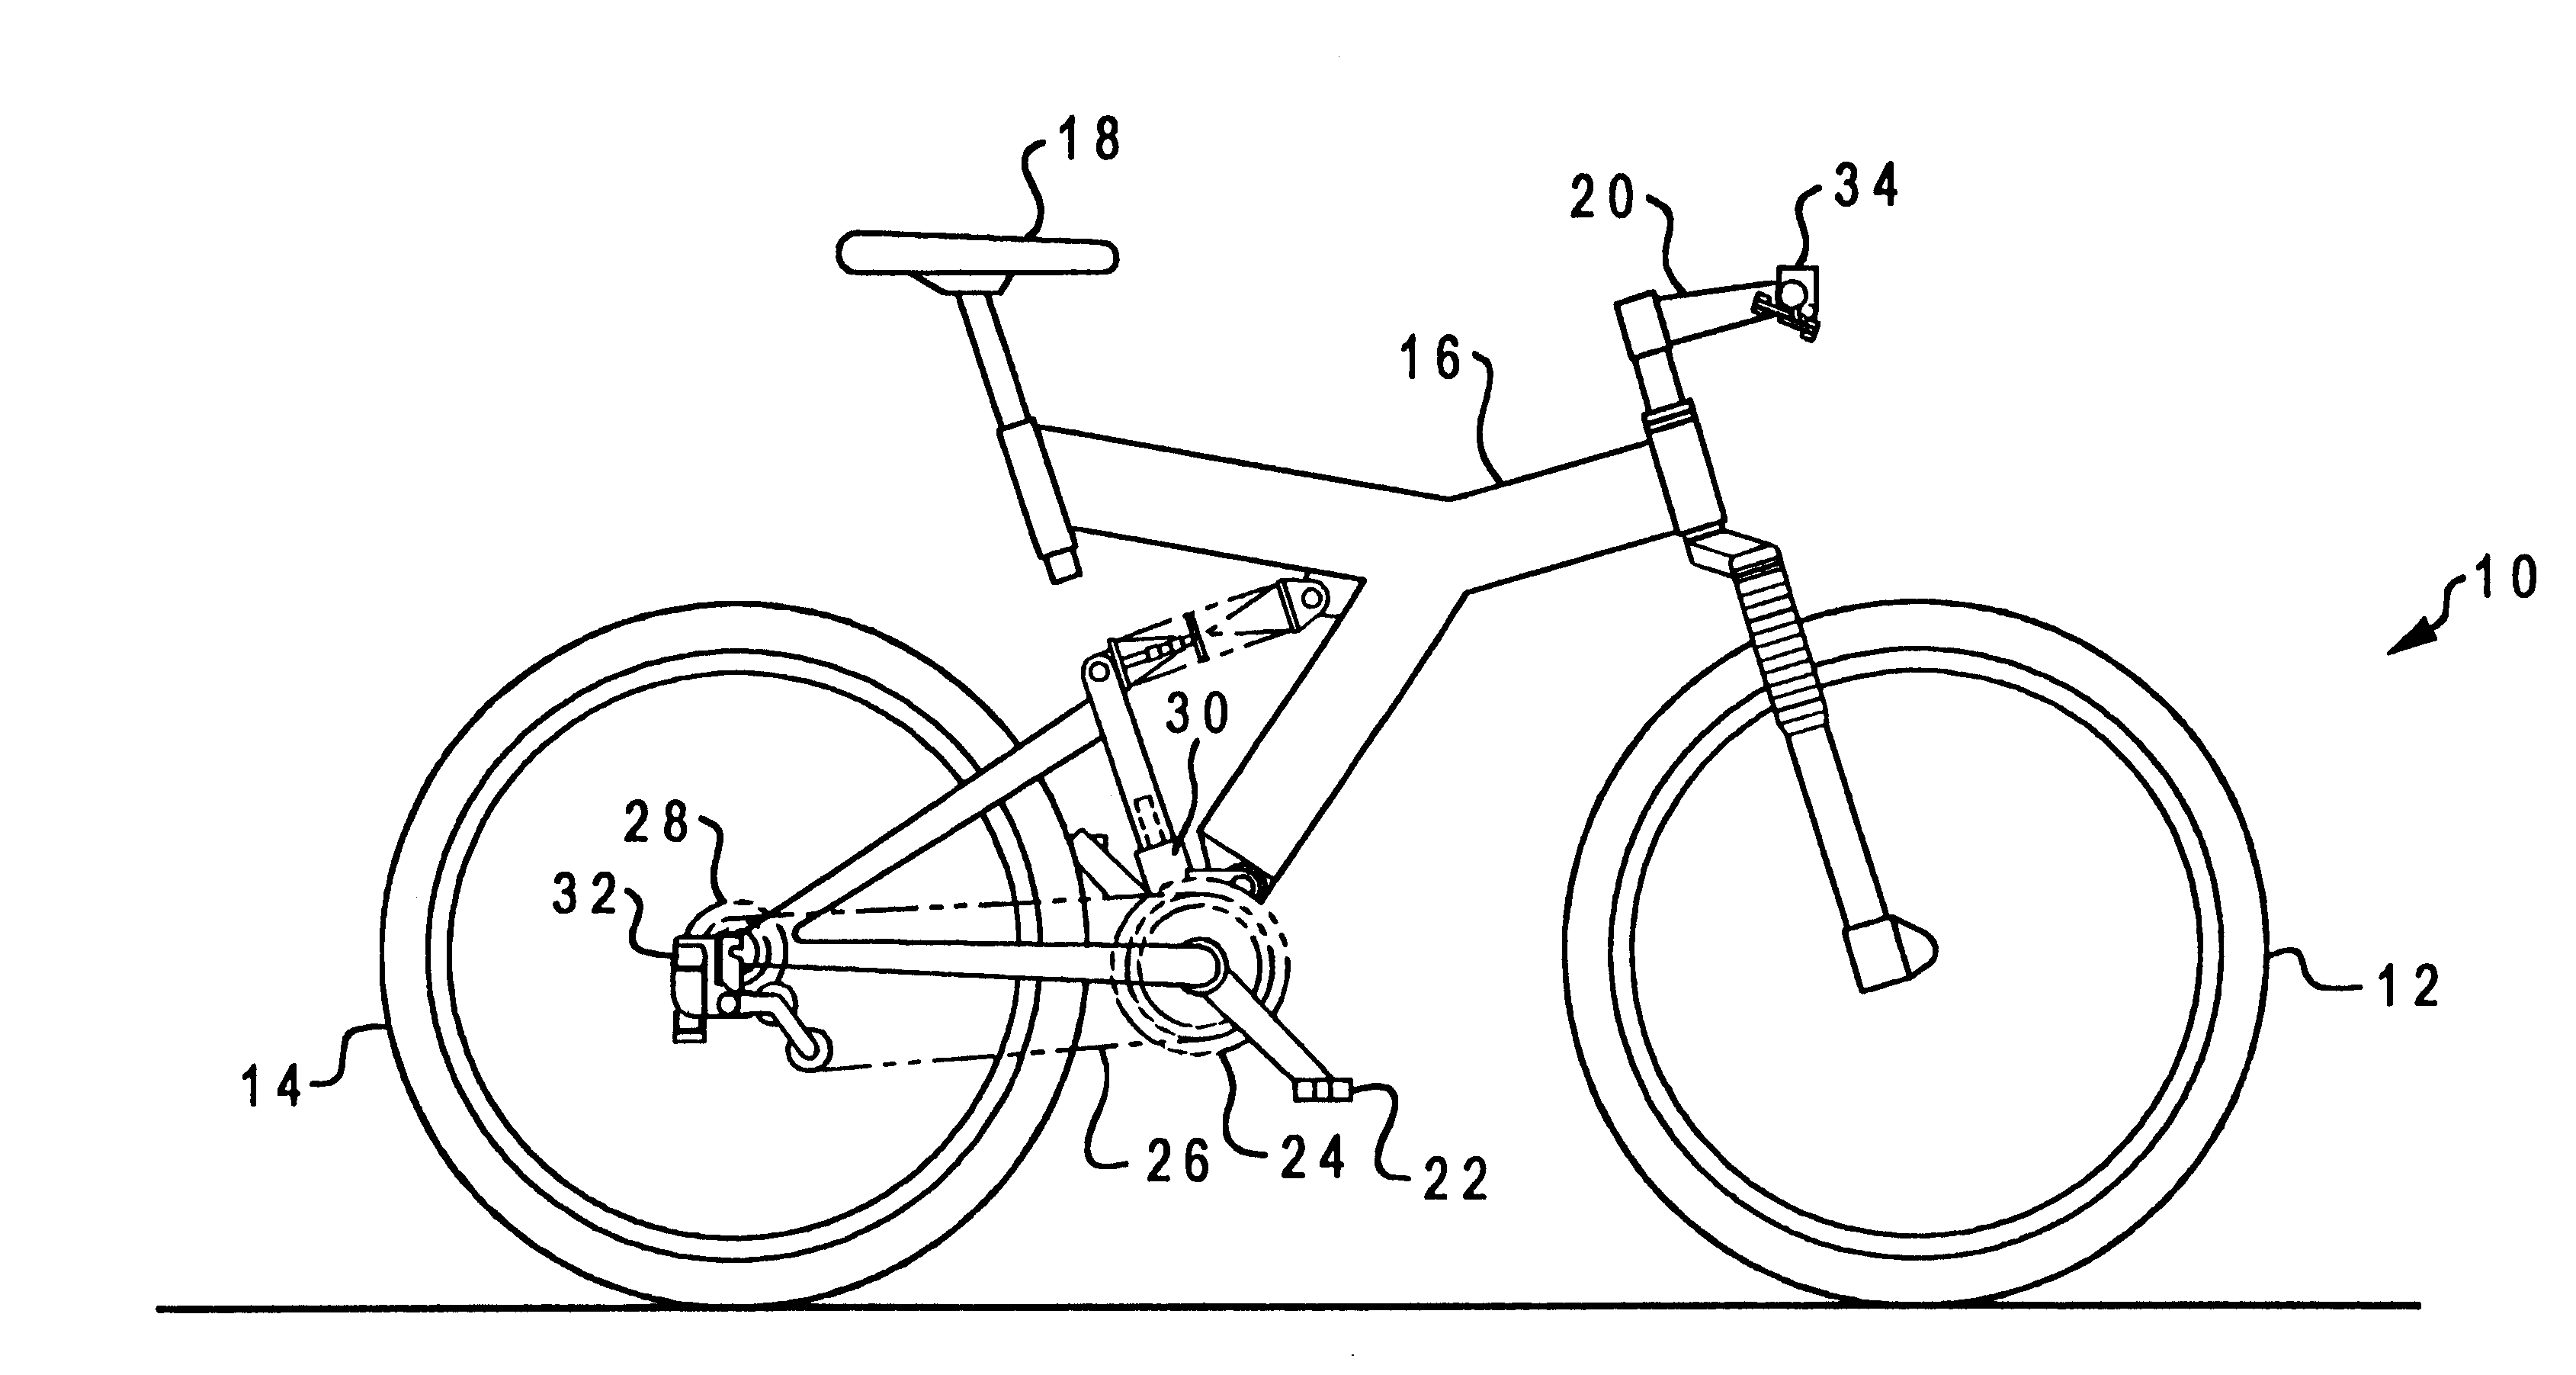 Hydraulically-operated bicycle shifting system with power shifting